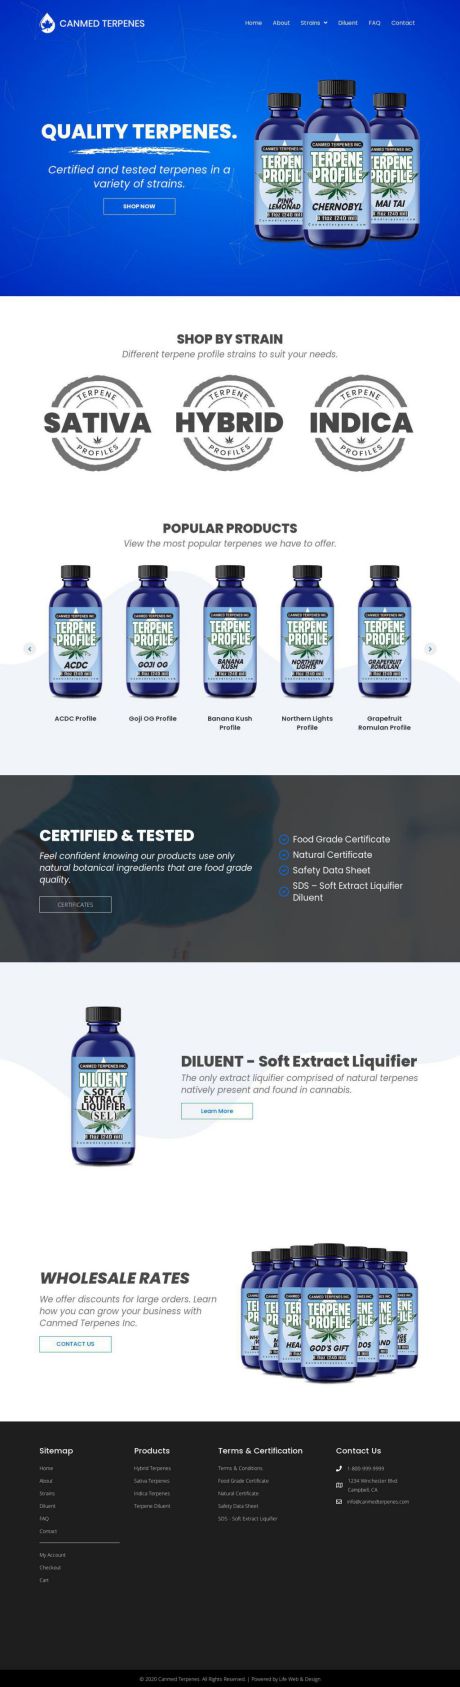 Mississauga product website design example